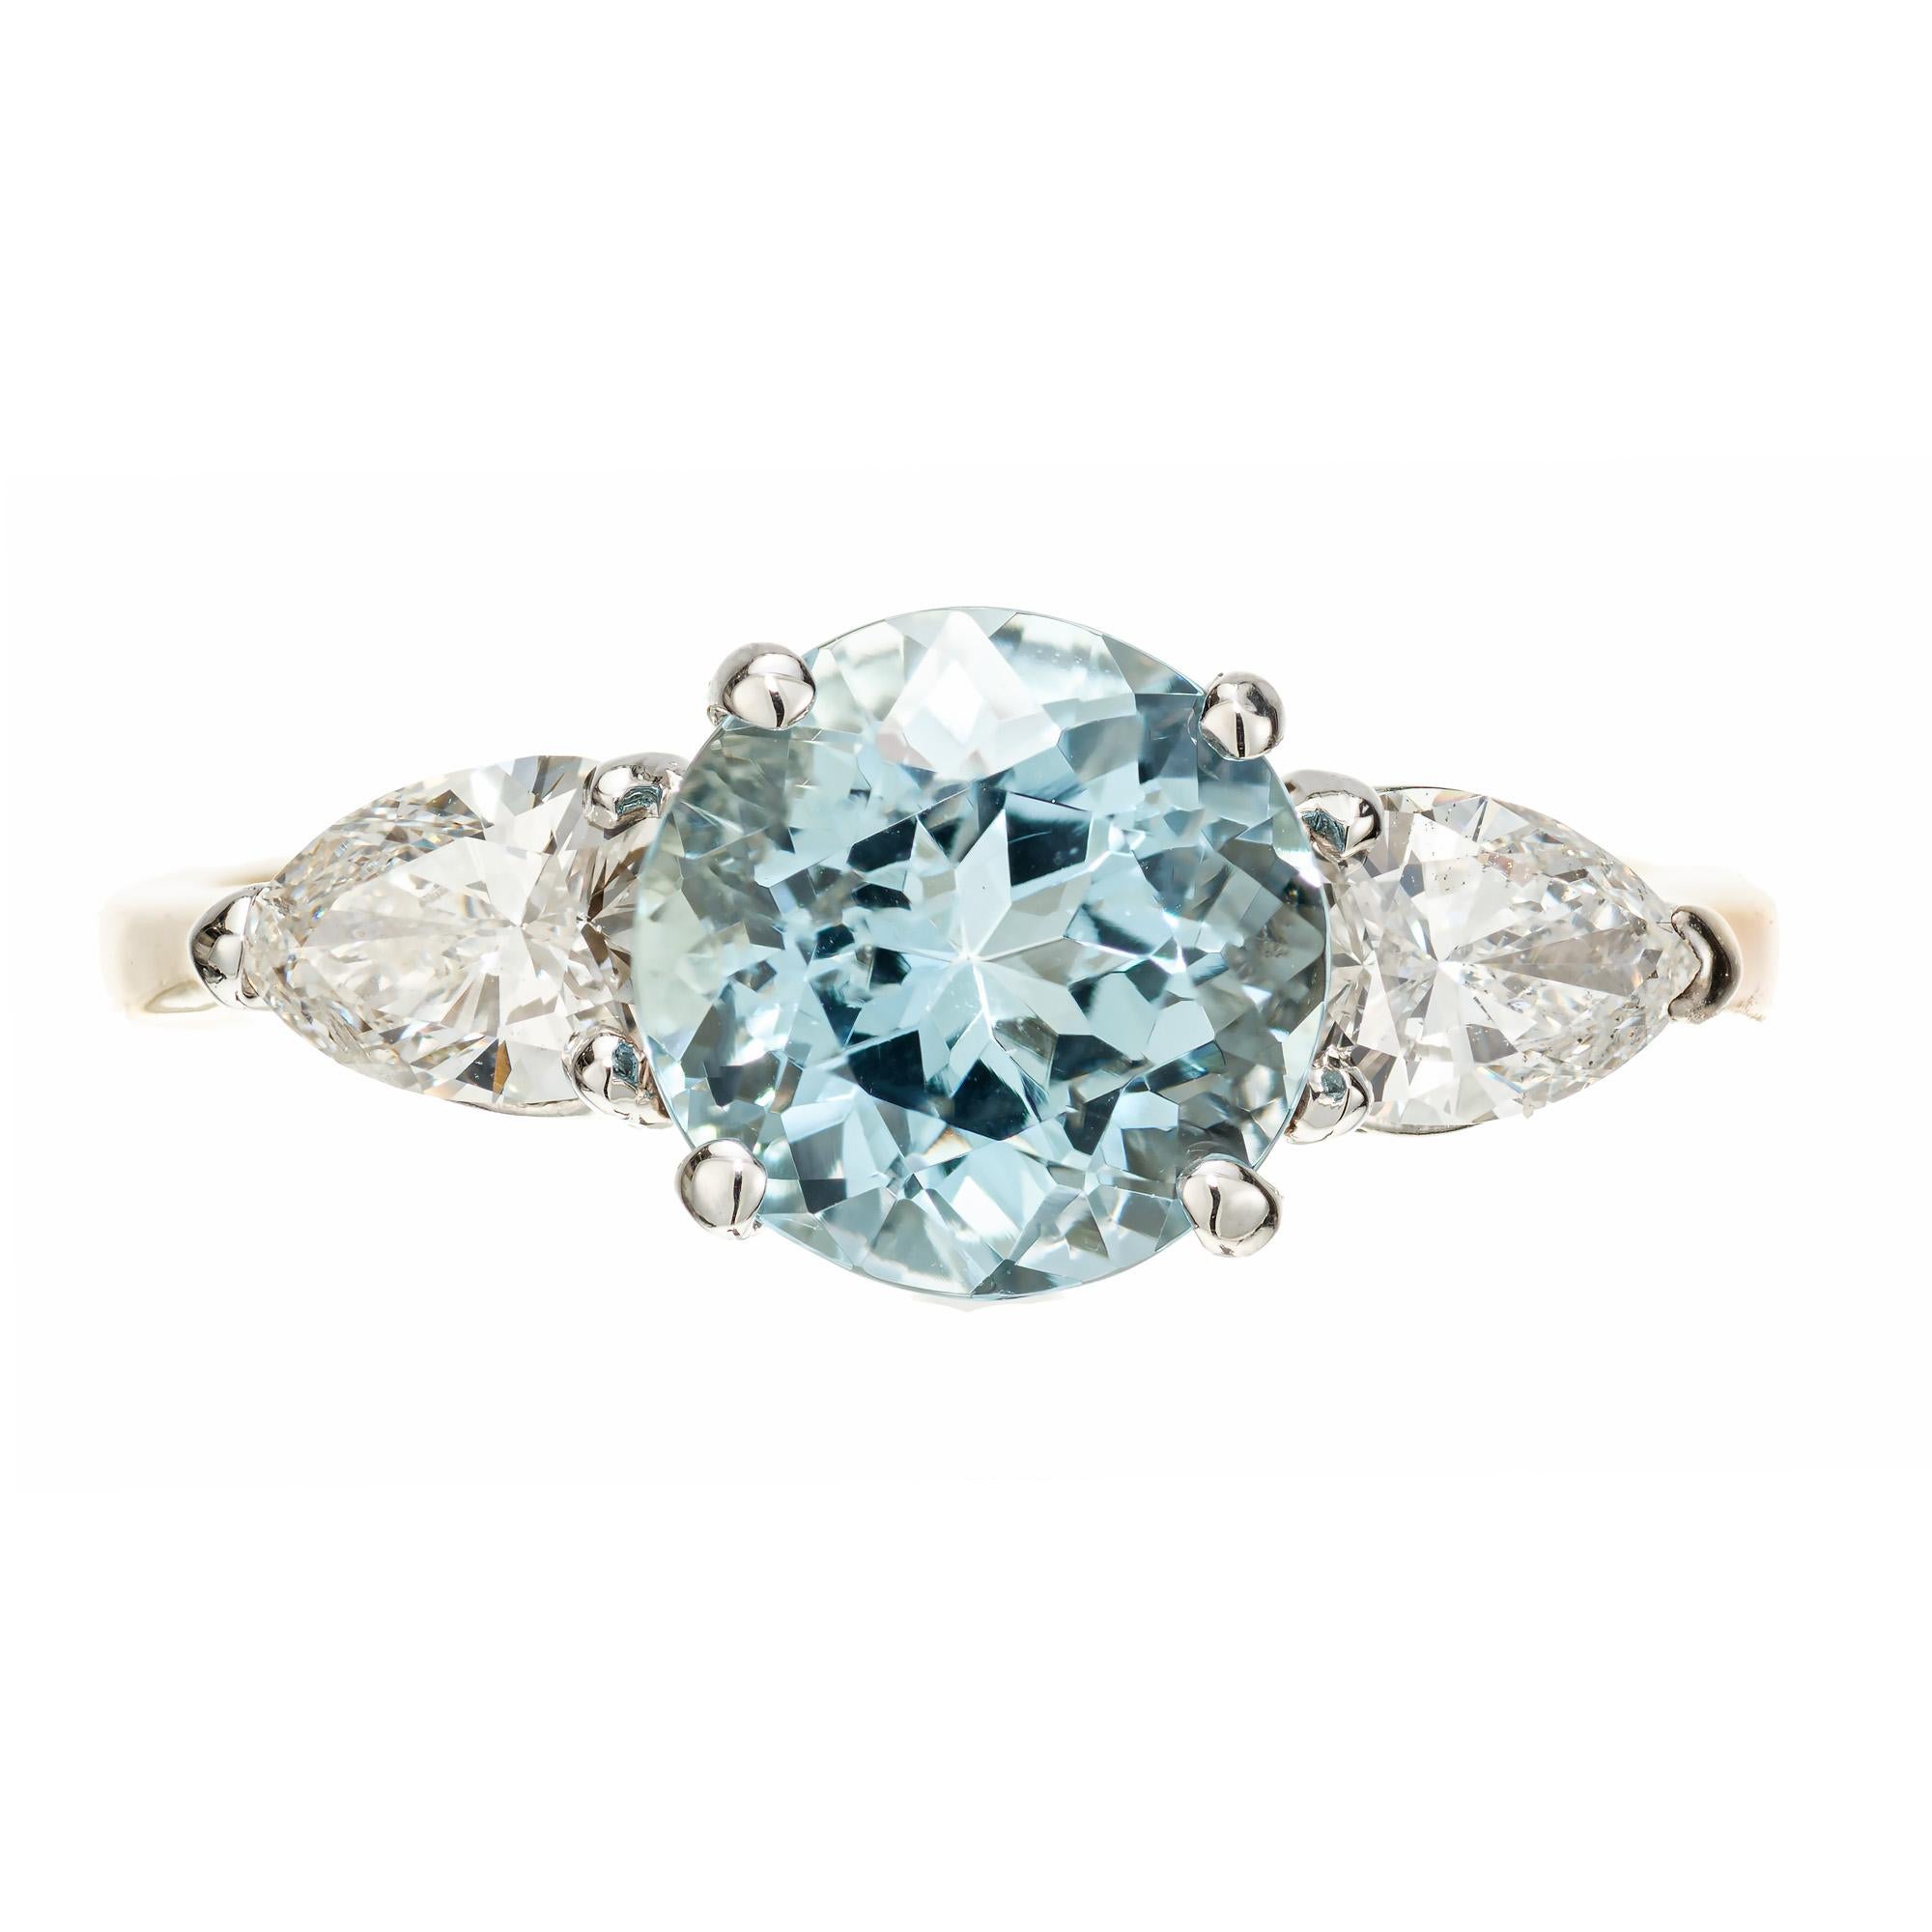 Aquamarine and diamond engagement ring. 1.65 round aqua center stone set in a 14k white and yellow gold setting with two pear shaped side diamonds. Designed and crafted in the Peter Suchy Workshop.

1 round blue aquamarine, VS approx. 1.65cts
2 pear